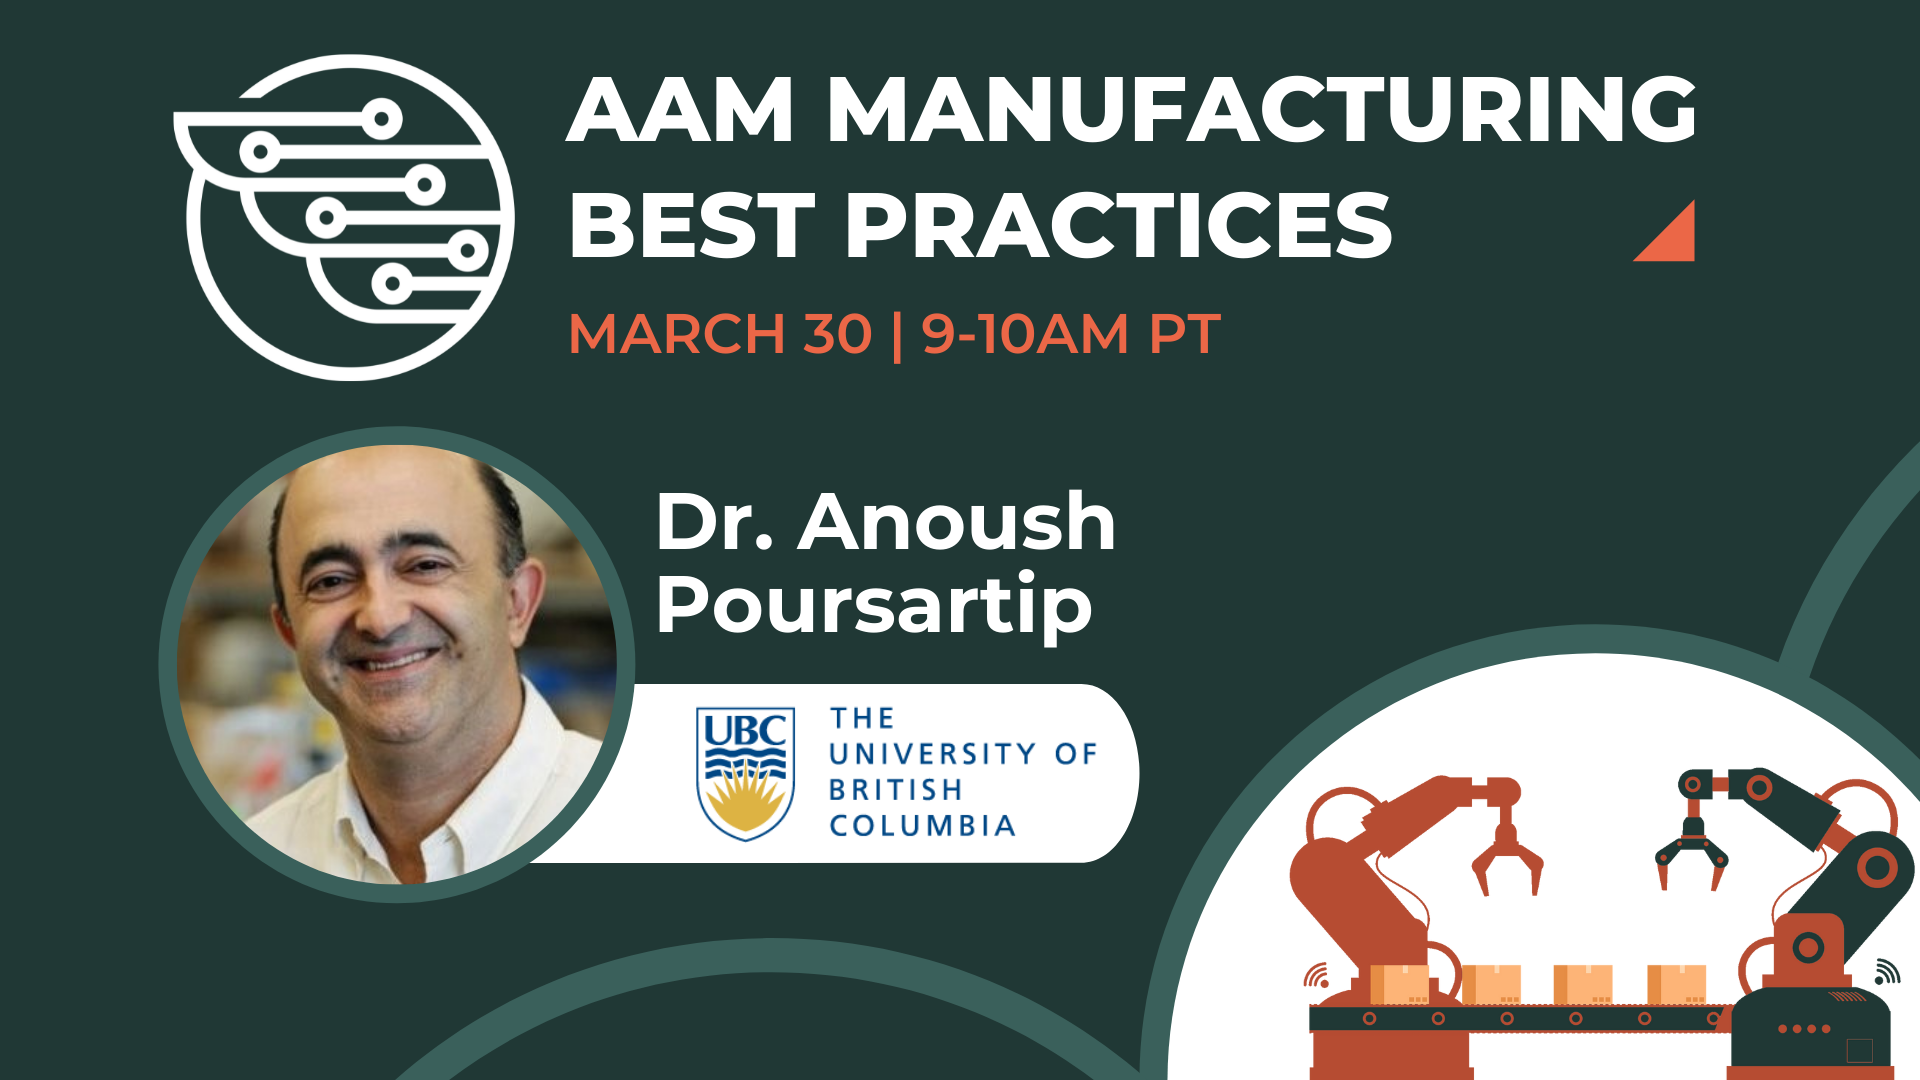 AAM Manufacturing Best Practice Anoush